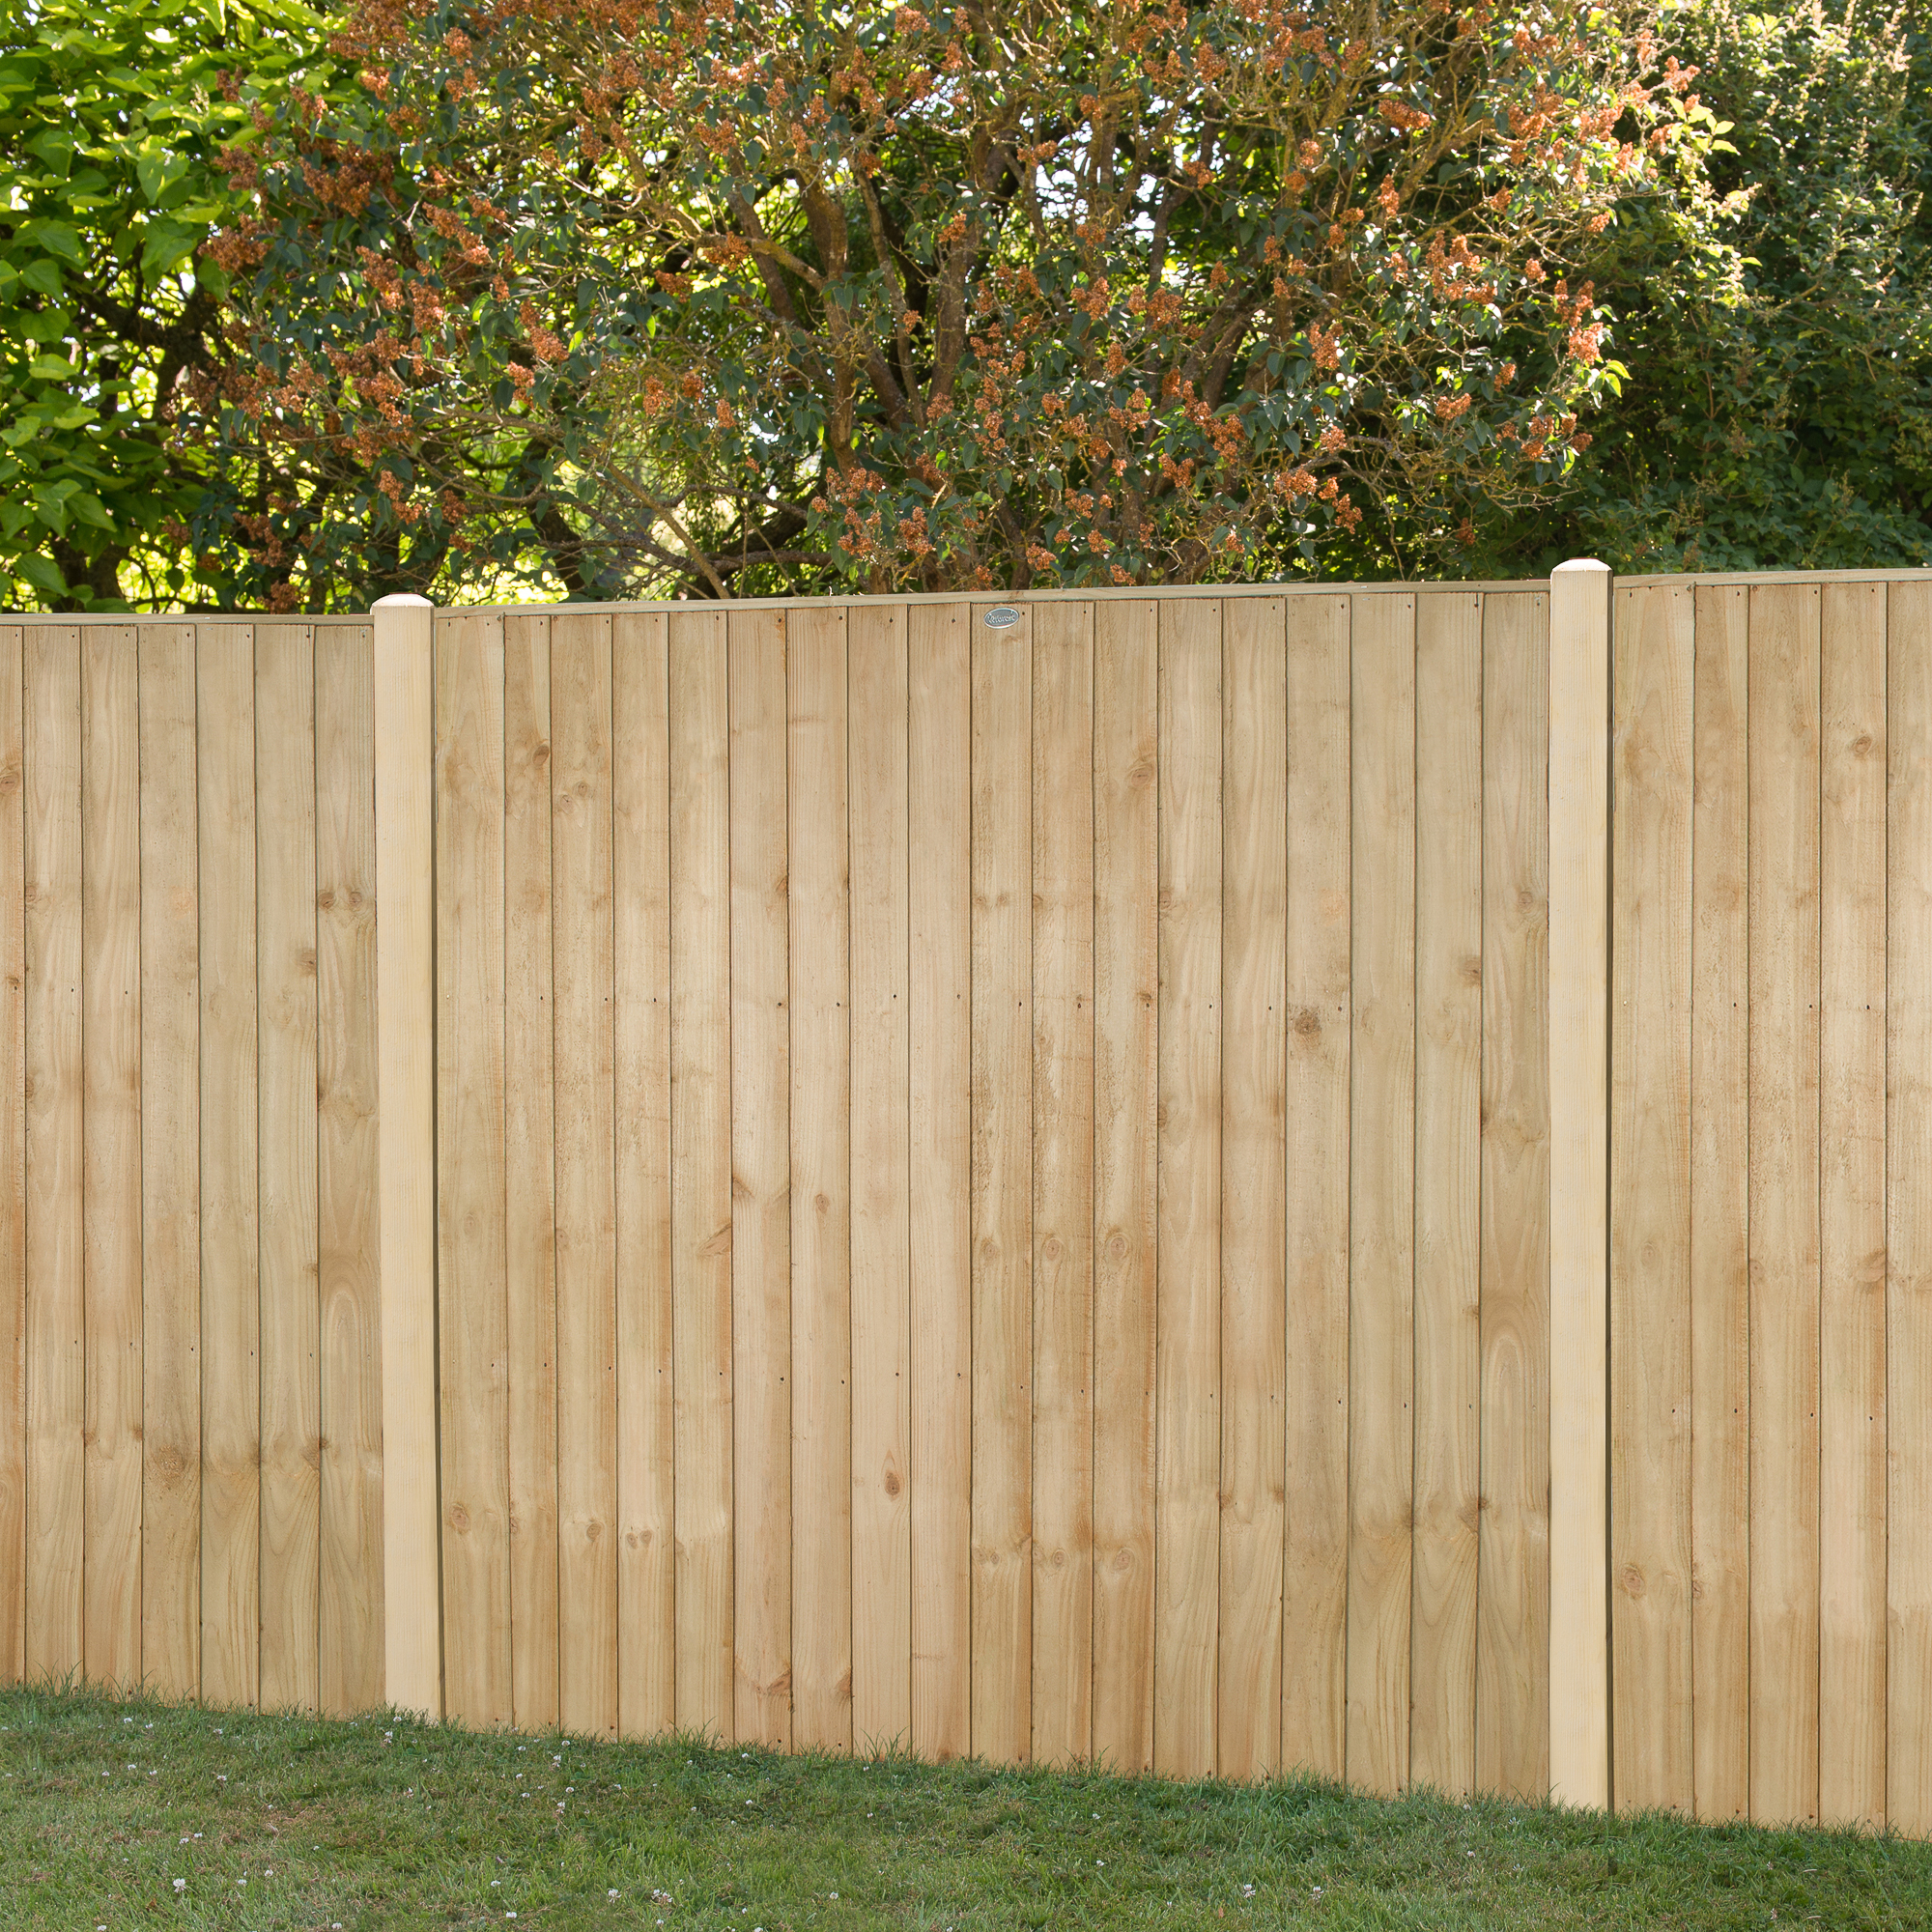 Image of Forest Garden Pressure Treated Closeboard Fence Panel - 1830 x 1540mm - 6 x 5ft - Pack of 3